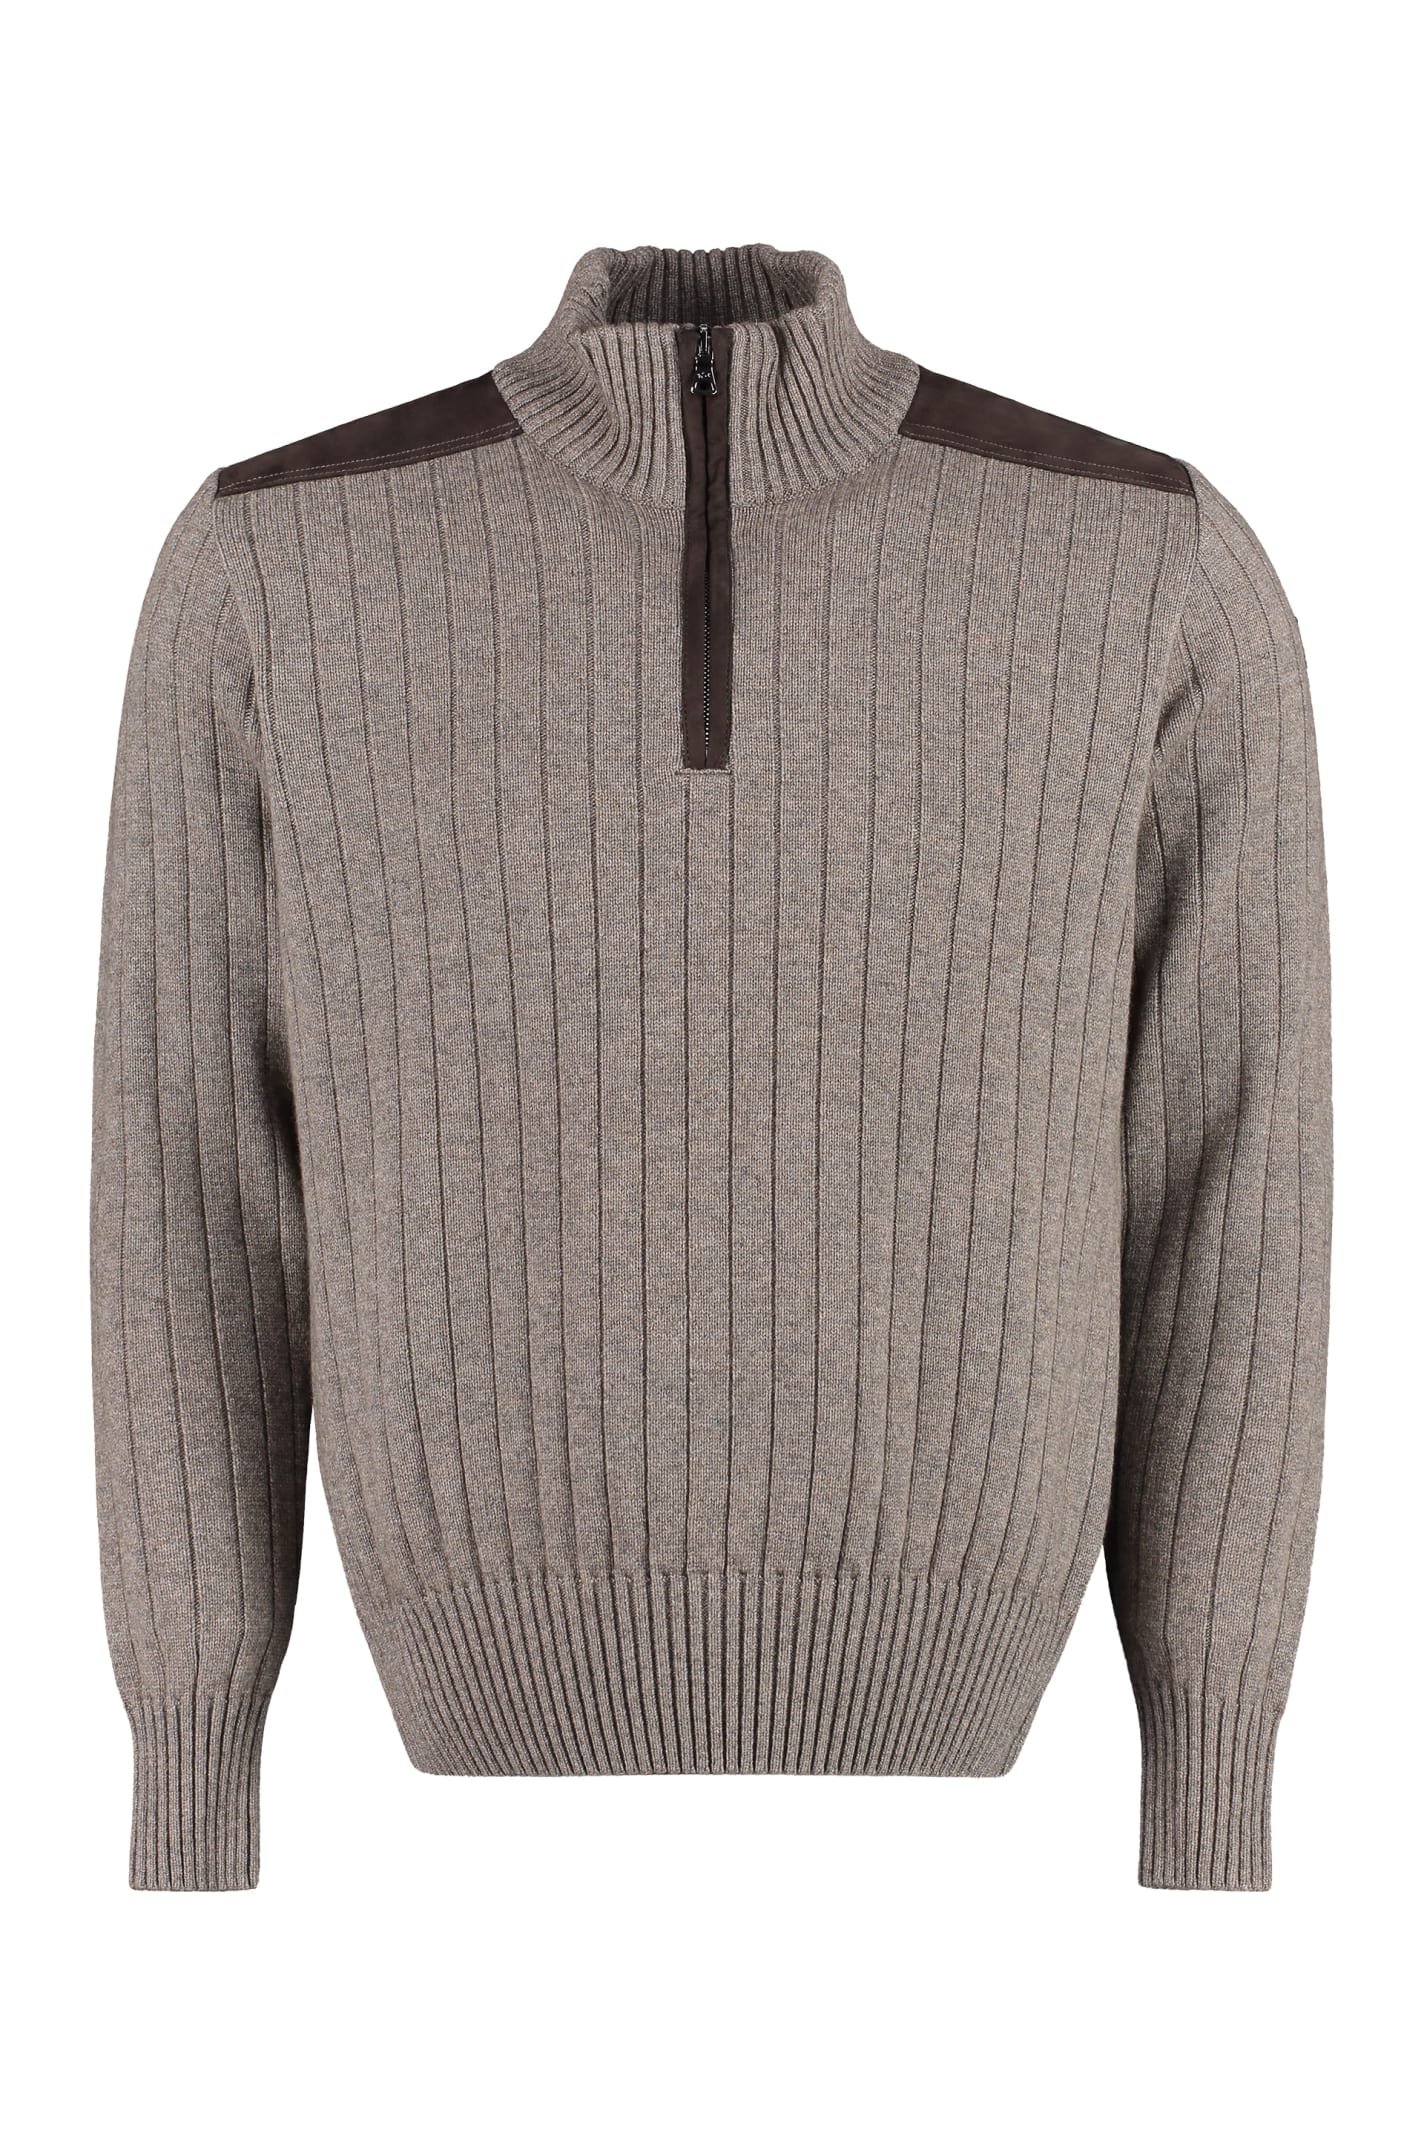 Paul & Shark Wool And Cachemire Turtleneck Pullover